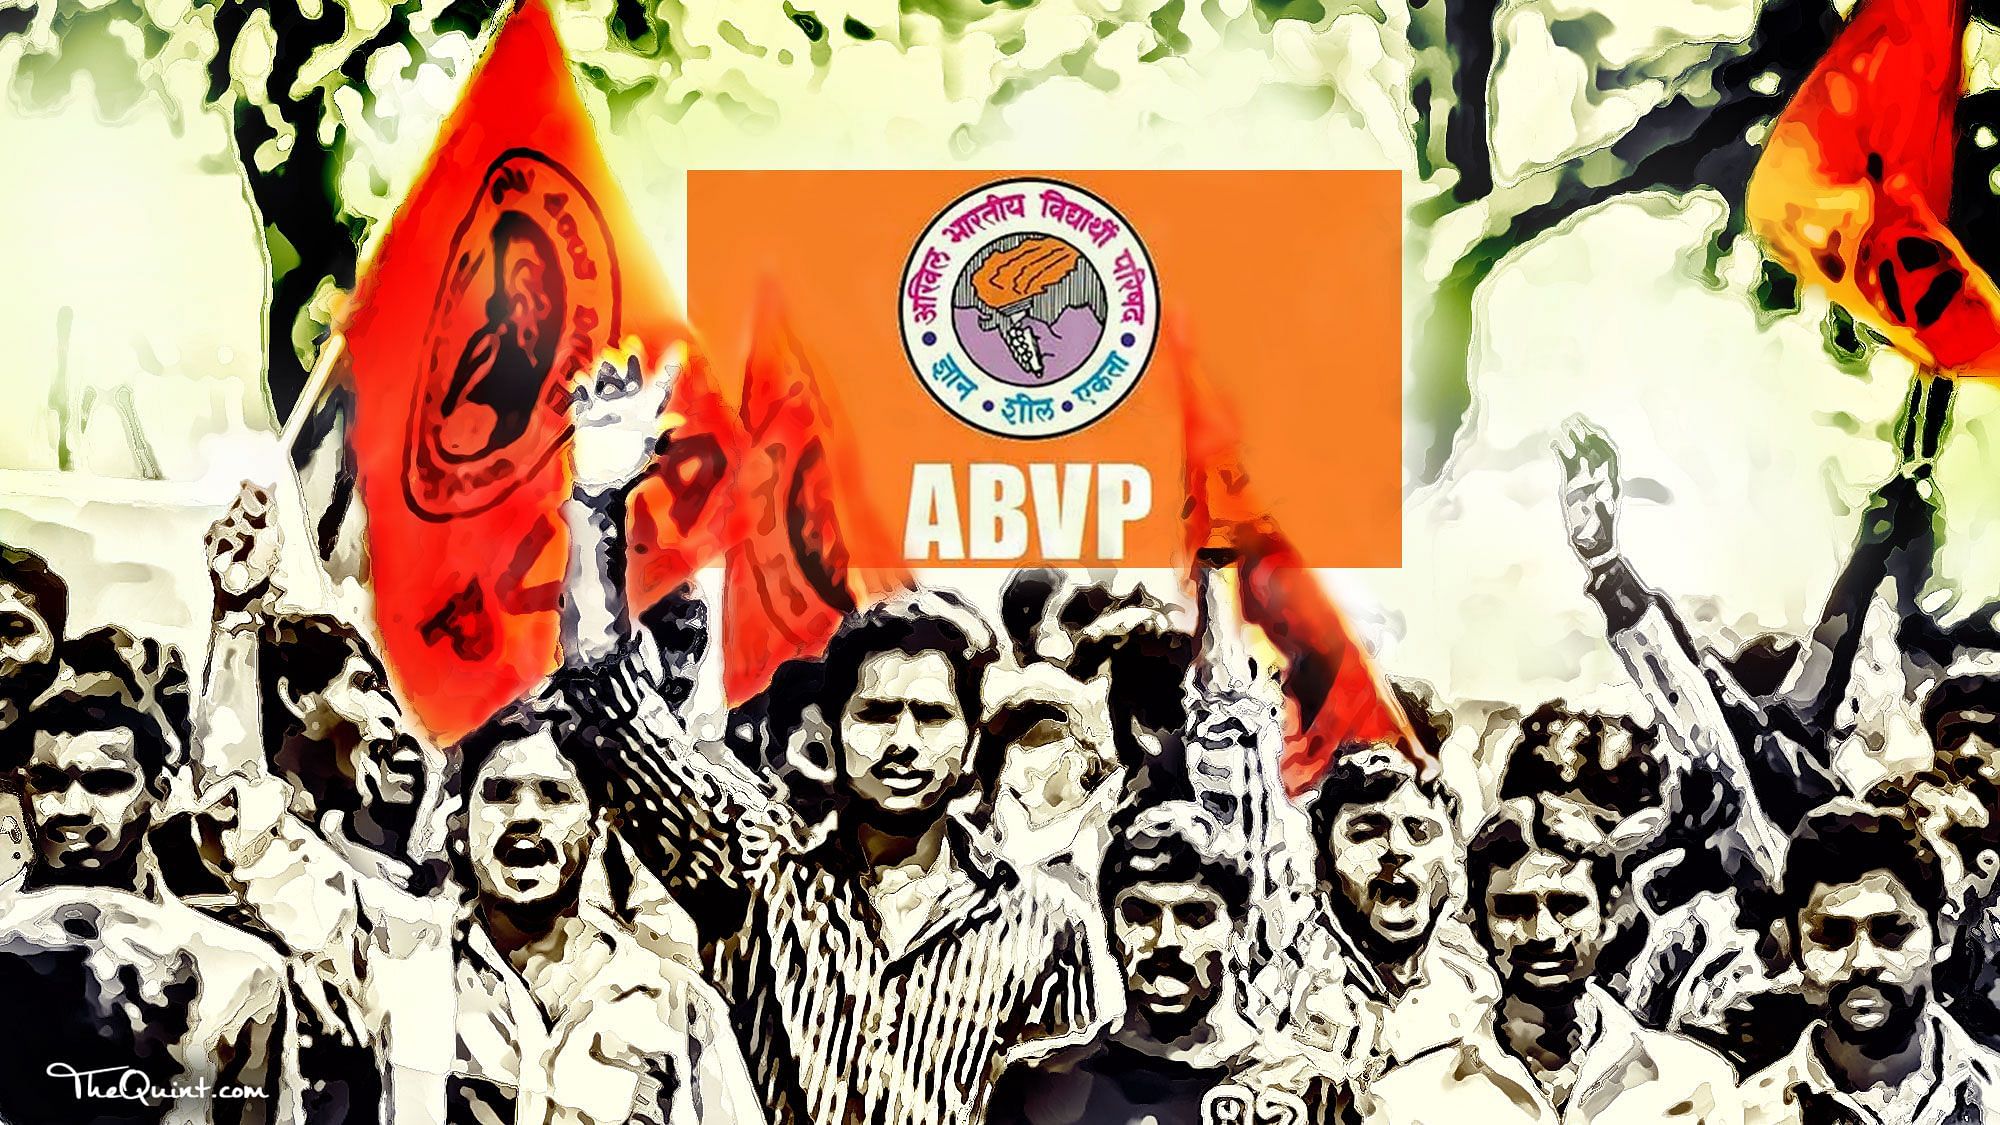 ABVP members forced a professor to apologise for an alleged ‘anti-national’ Facebook post.